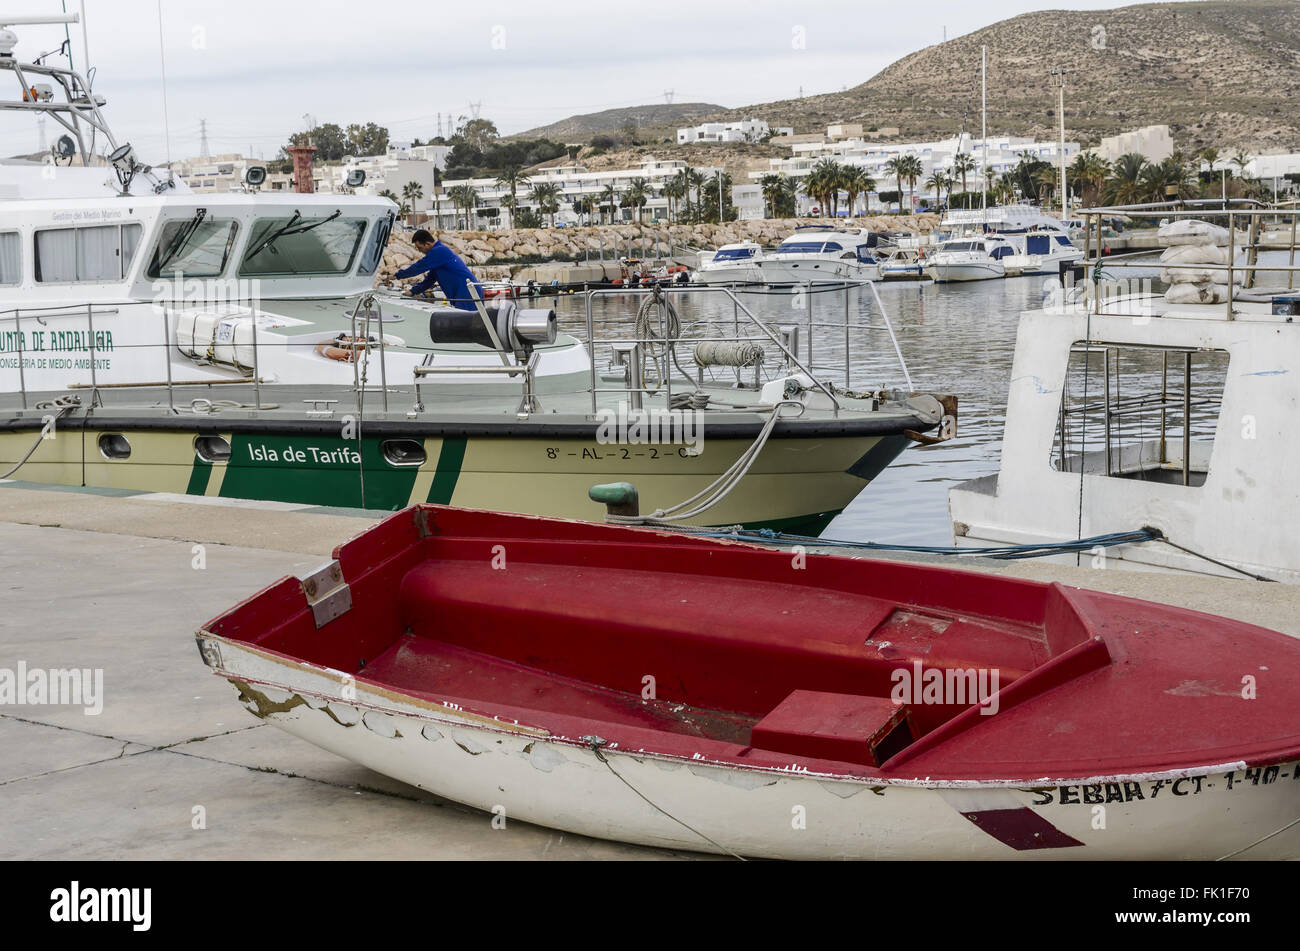 A red boat view in Carboneras port, Almería province, Spain Stock Photo